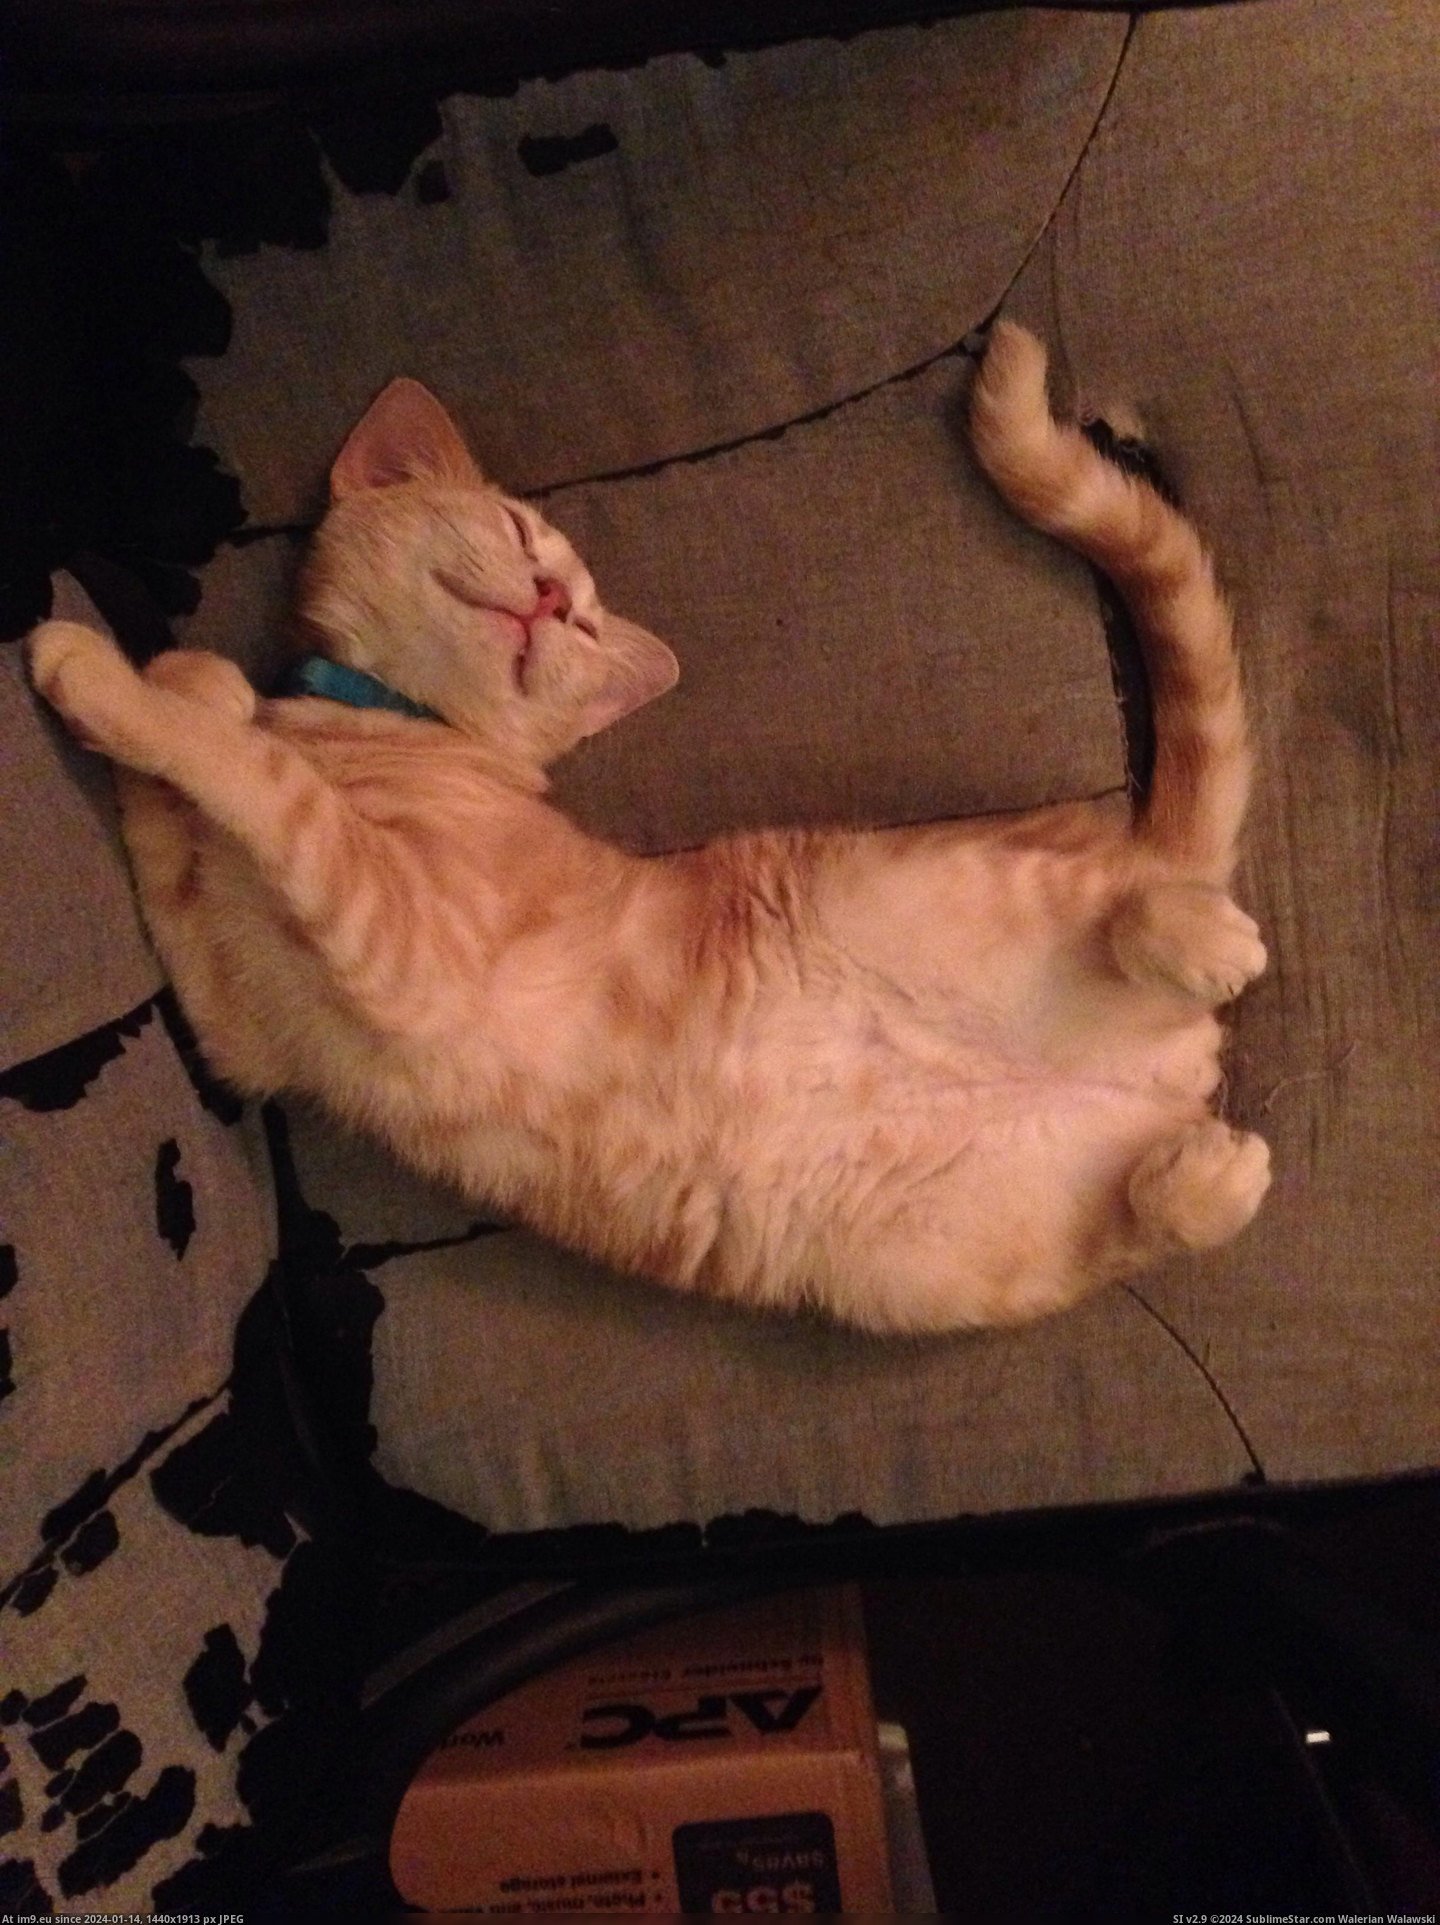 #Boy #How #Note #Curled #Toes #Our #Sleeps [Aww] This is how our little boy sleeps. Note the curled toes. Pic. (Изображение из альбом My r/AWW favs))